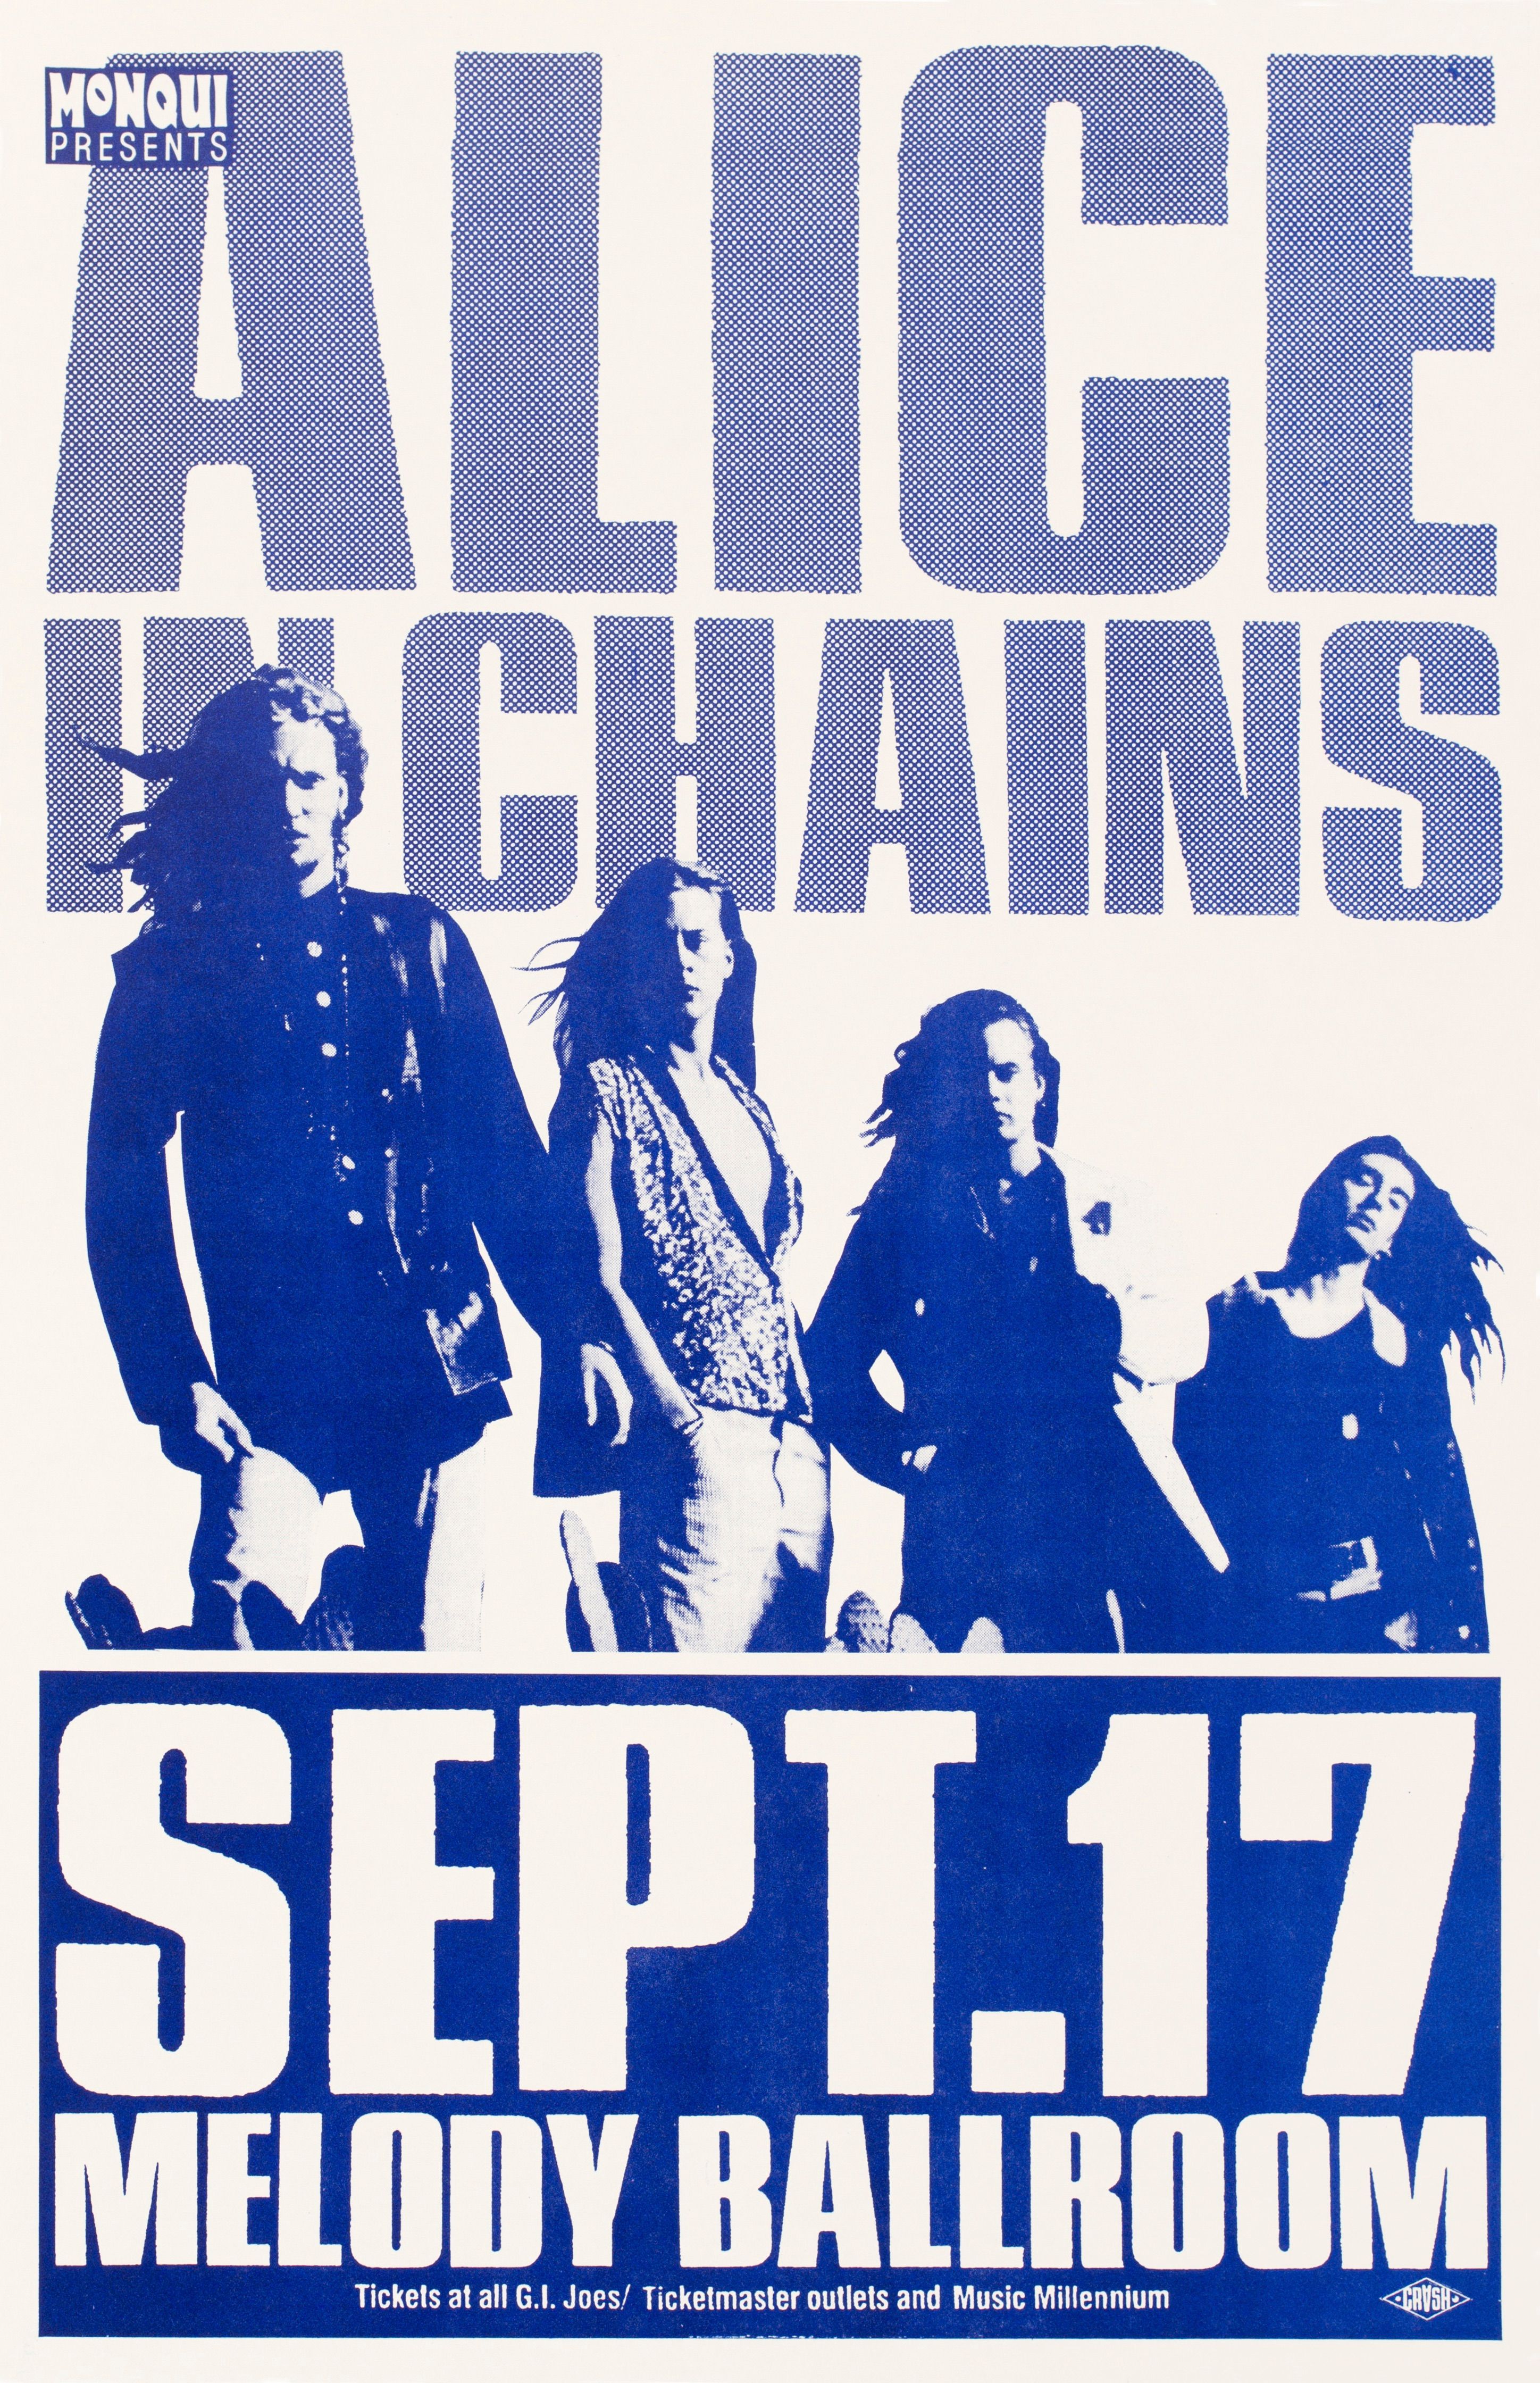 MXP-266.3 Alice In Chains 1992 Melody Ballroom  Sep 17 Concert Poster